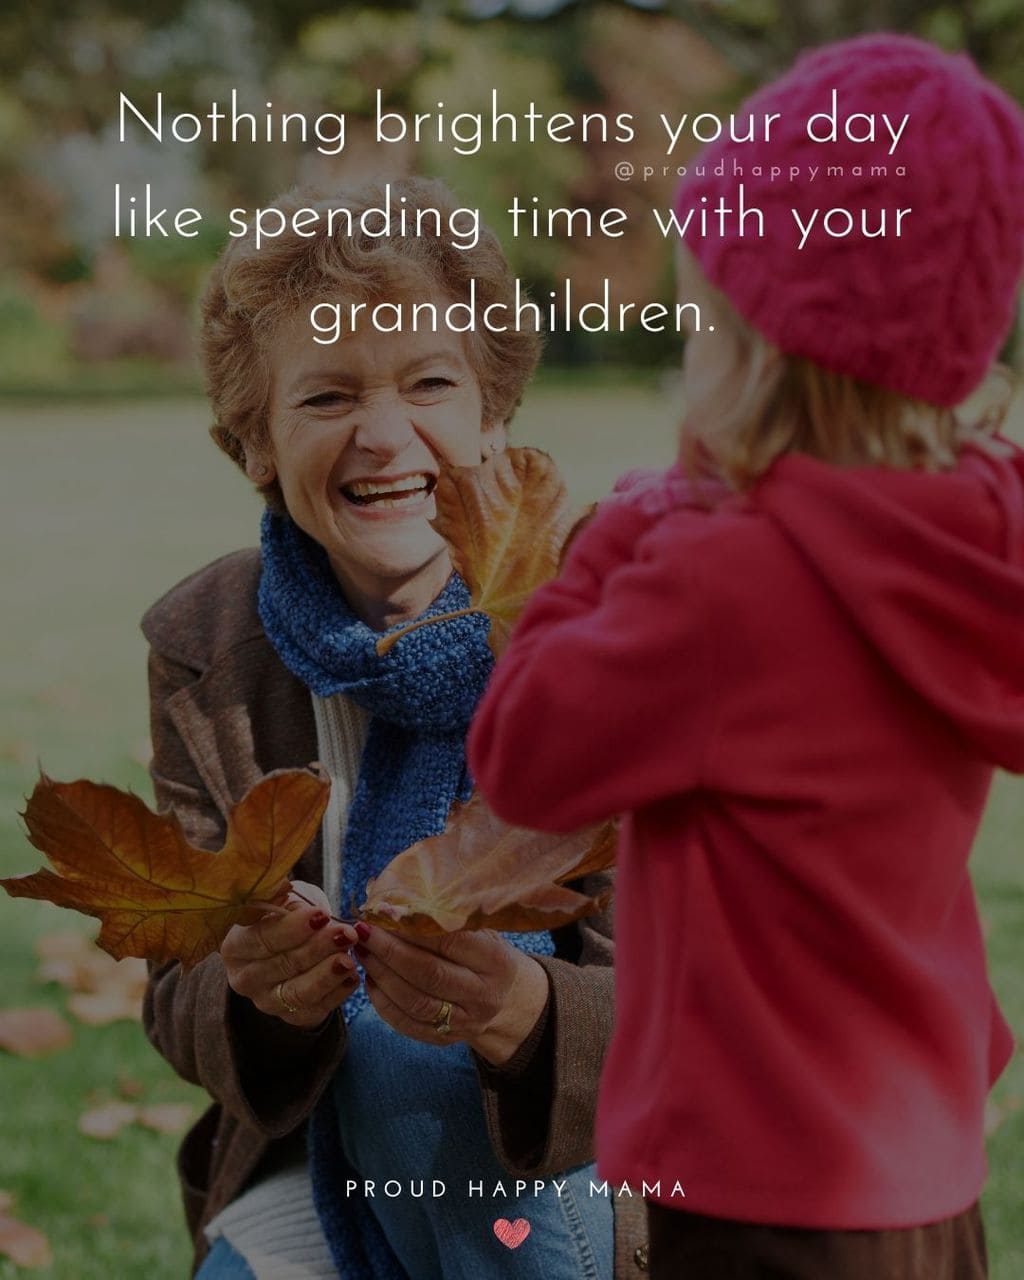 Quotes for Grandchildren - Nothing brightens your day like spending time with your grandchildren.